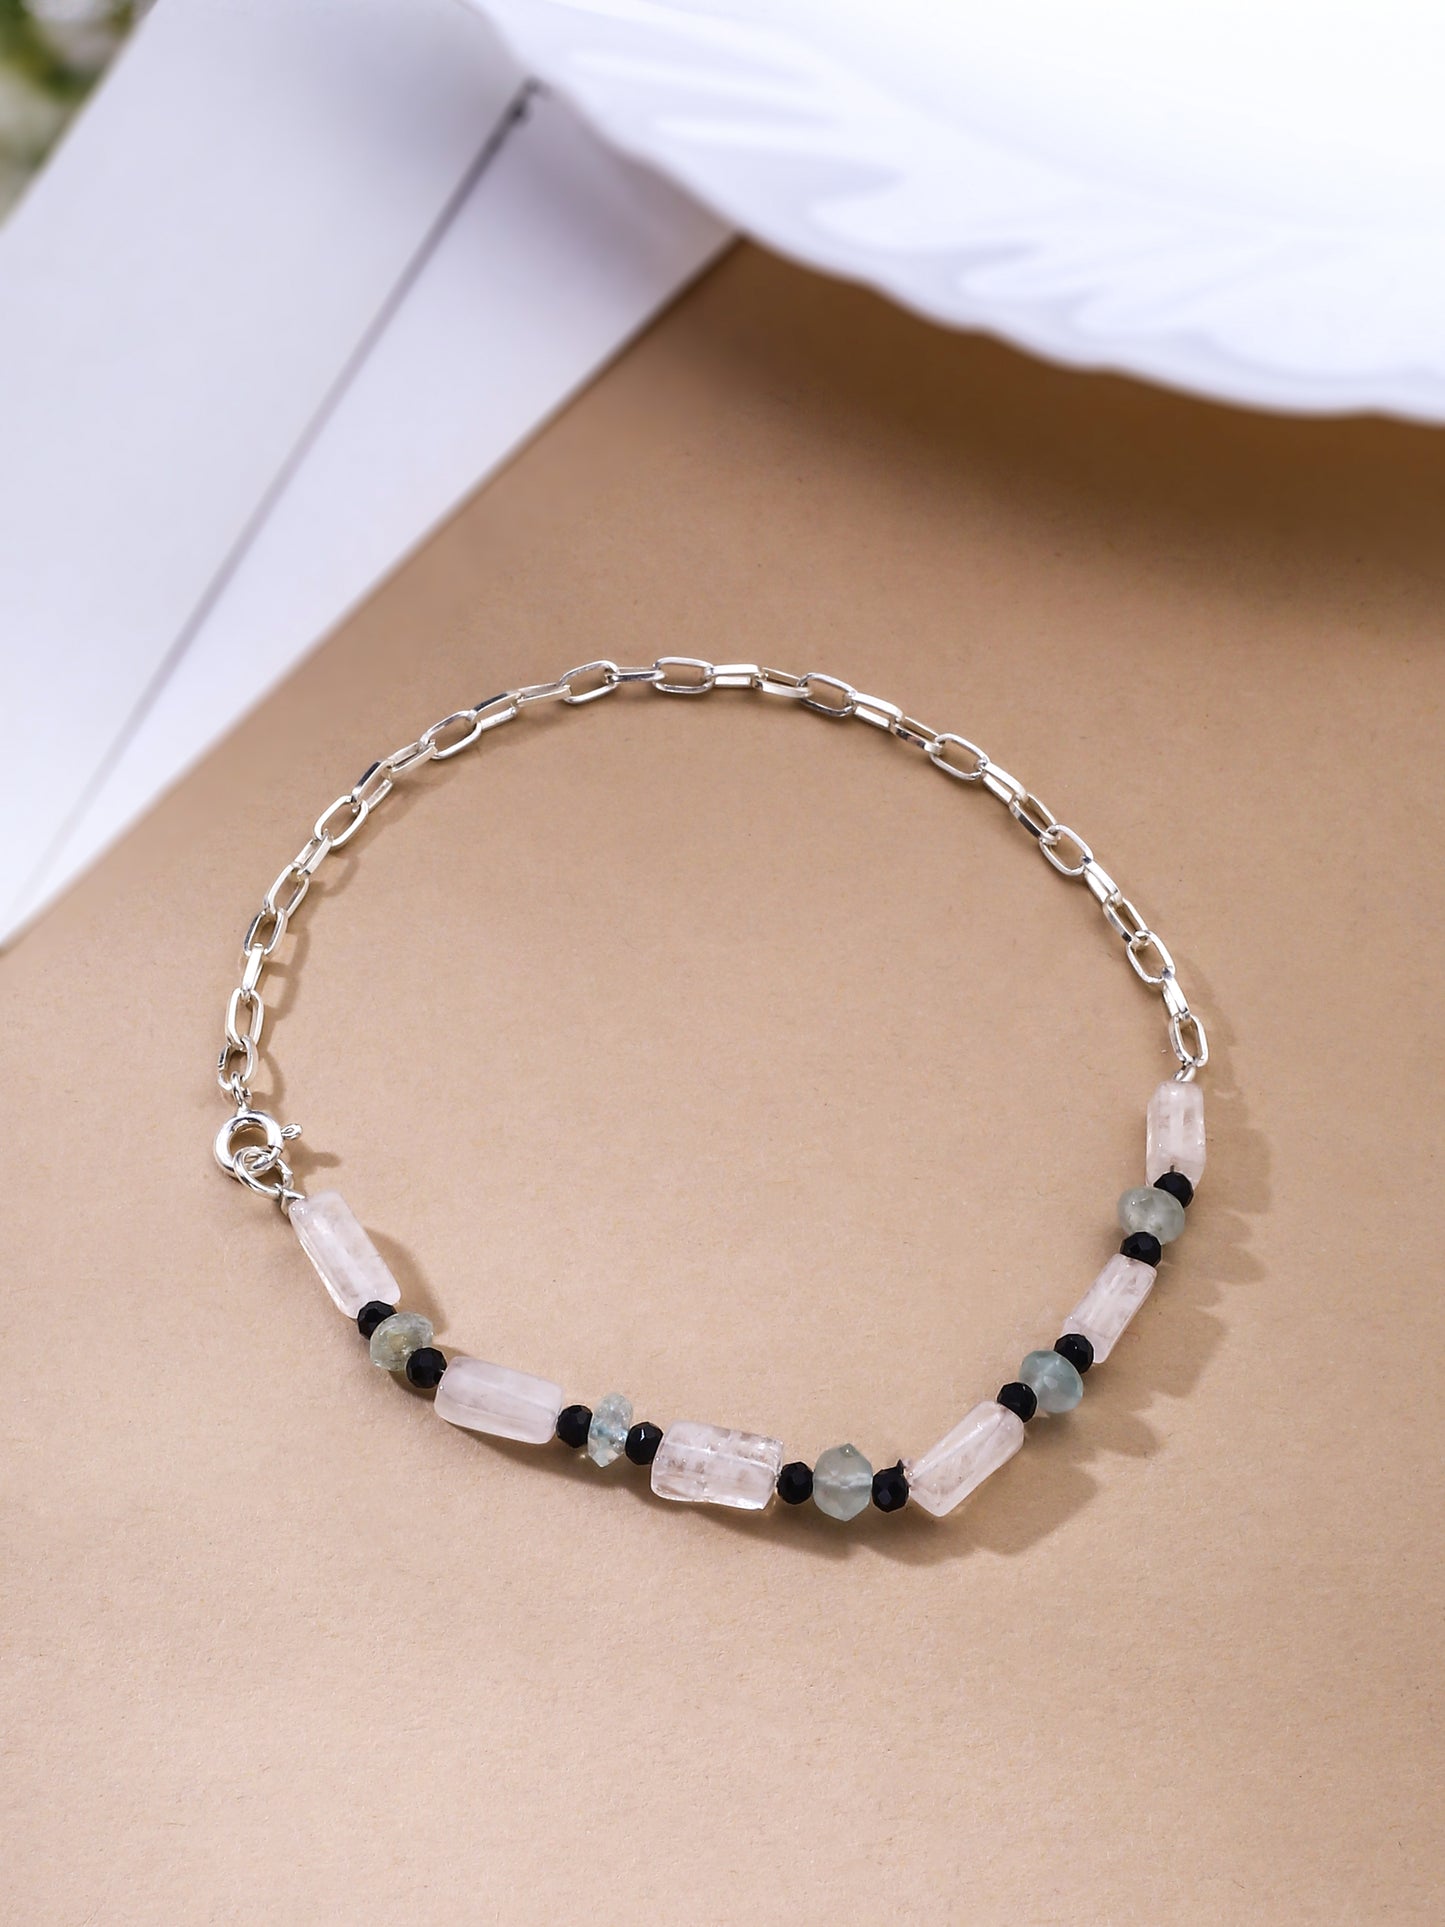 Initial Adorned Anklet in Sterling Silver